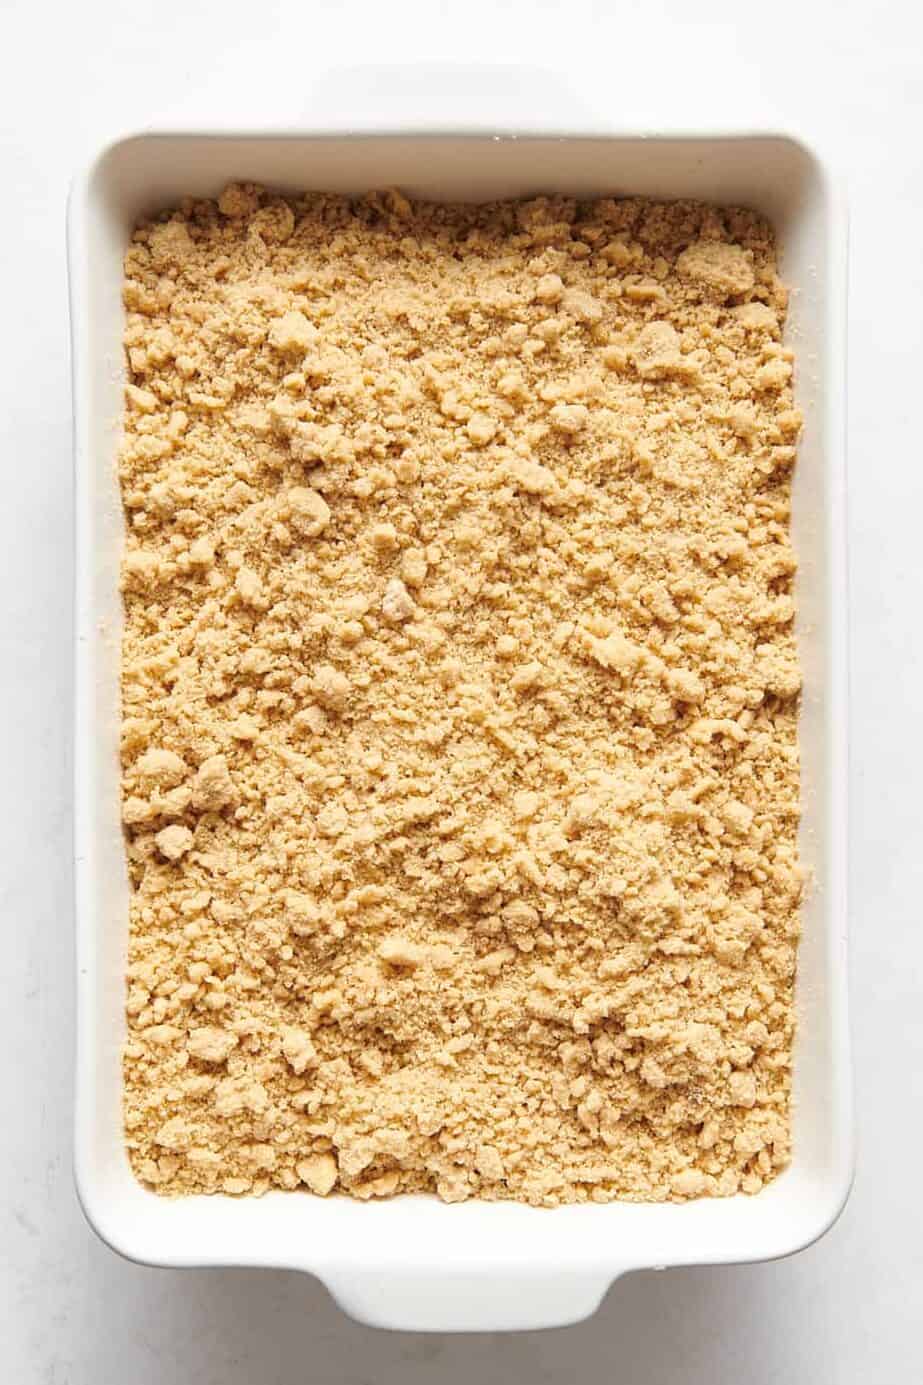 9x13 casserole dish of peach crumble topping mixture